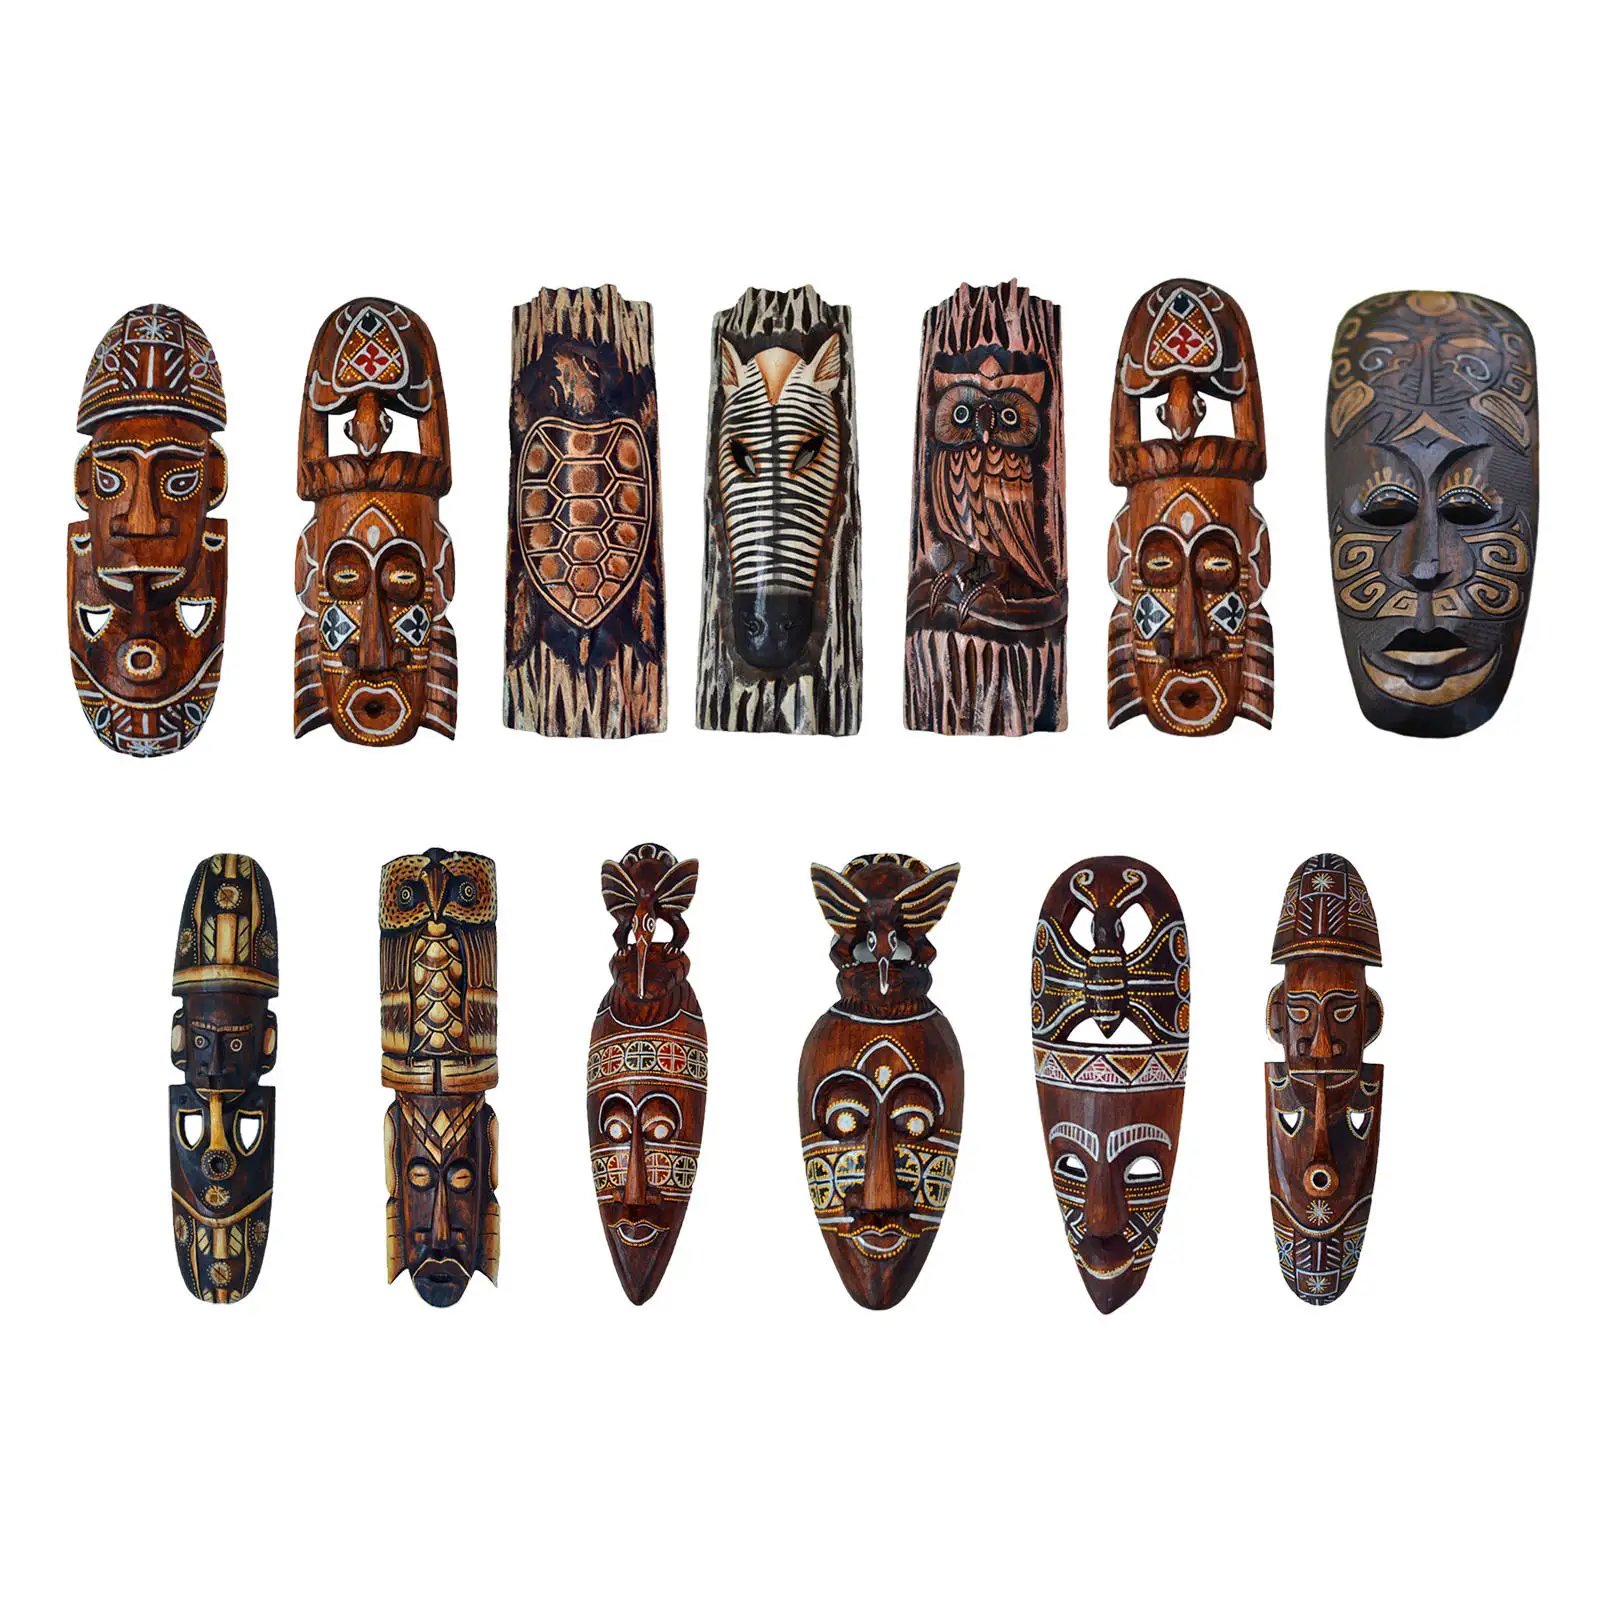 Thai Wooden Mask Wall Hanging Solid Carving Painted Facebook Wall Decoration Bar Home Decorations African Mask Crafts